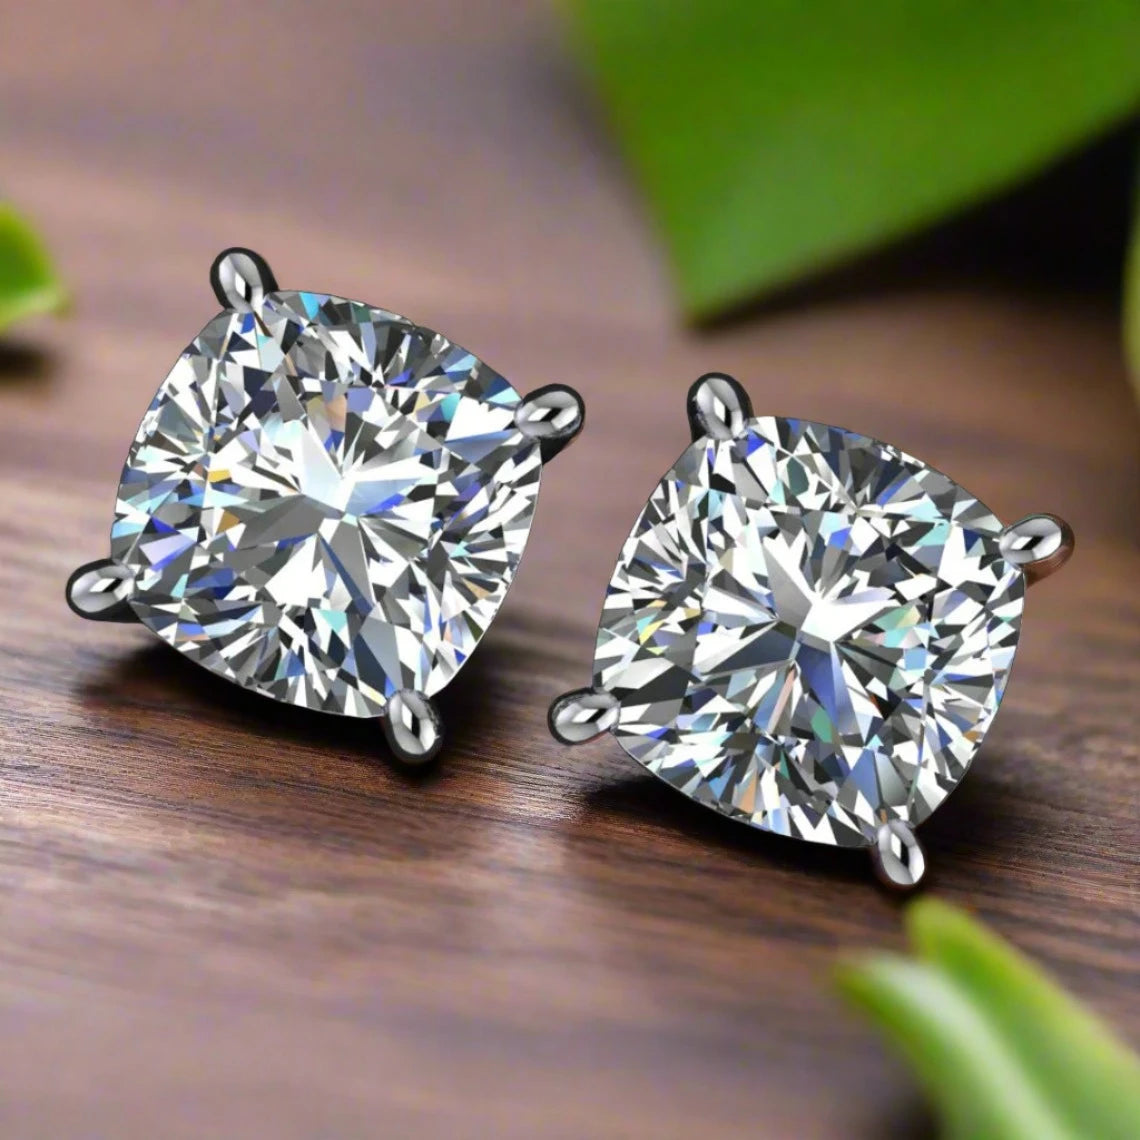 cushion moissanite stud earrings, 3.5 carat total weight - J Hollywood Designs